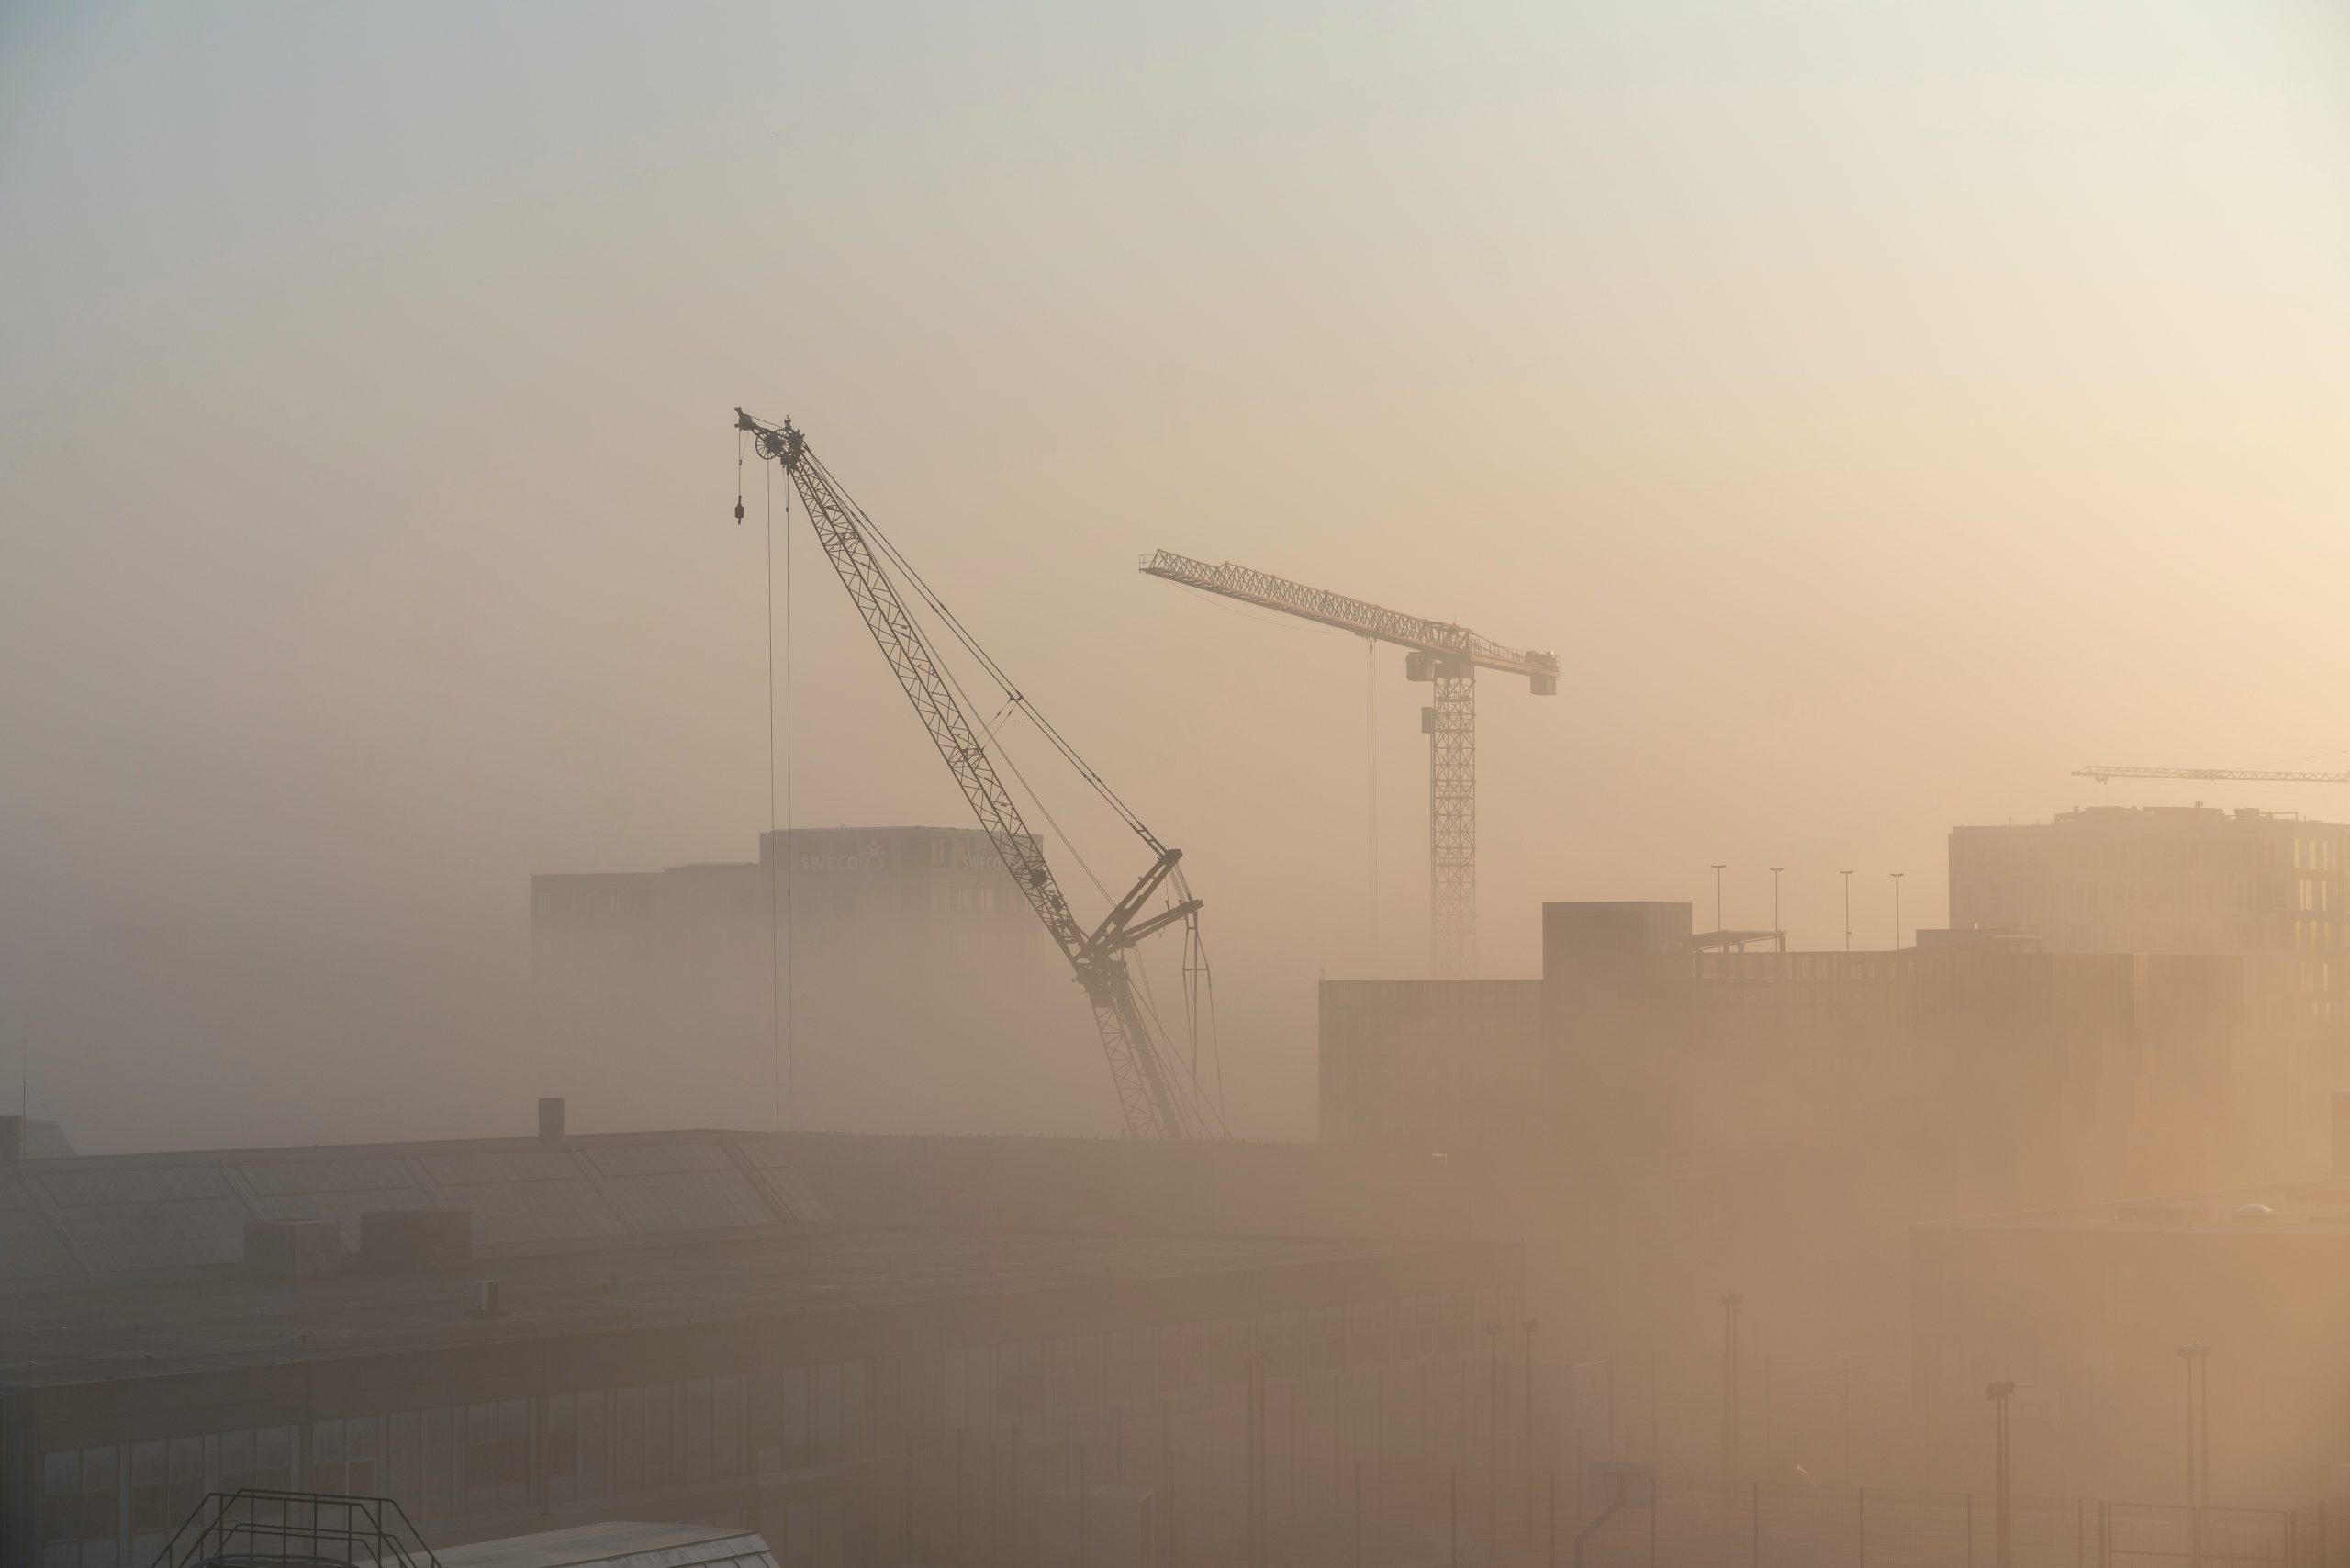 A picture of cranes in a dusty landscape